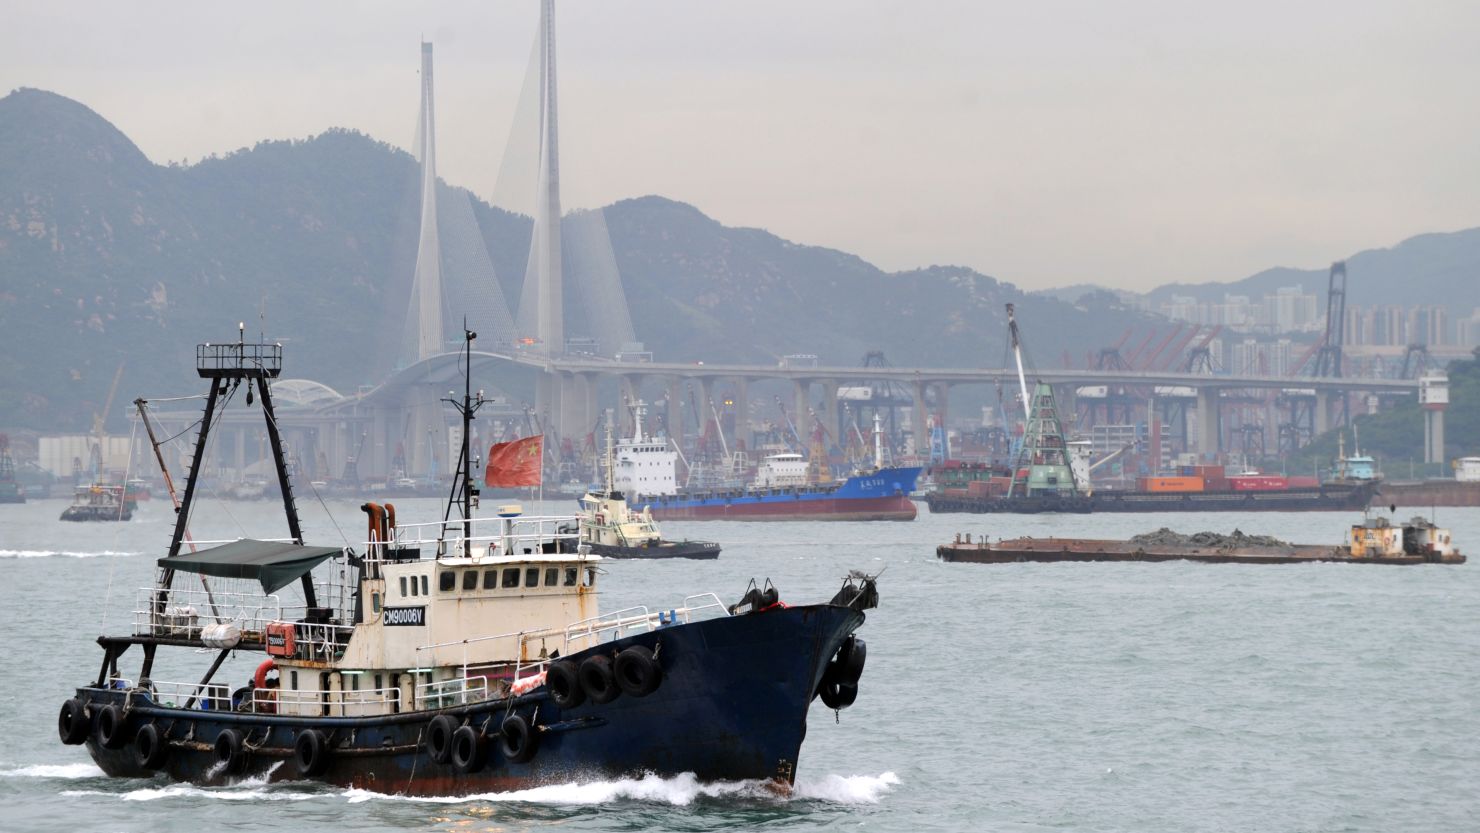 A fishing boat carrying Hong Kong activists sails near Hong Kong in September 2010 for the disputed island chain in the East China Sea.